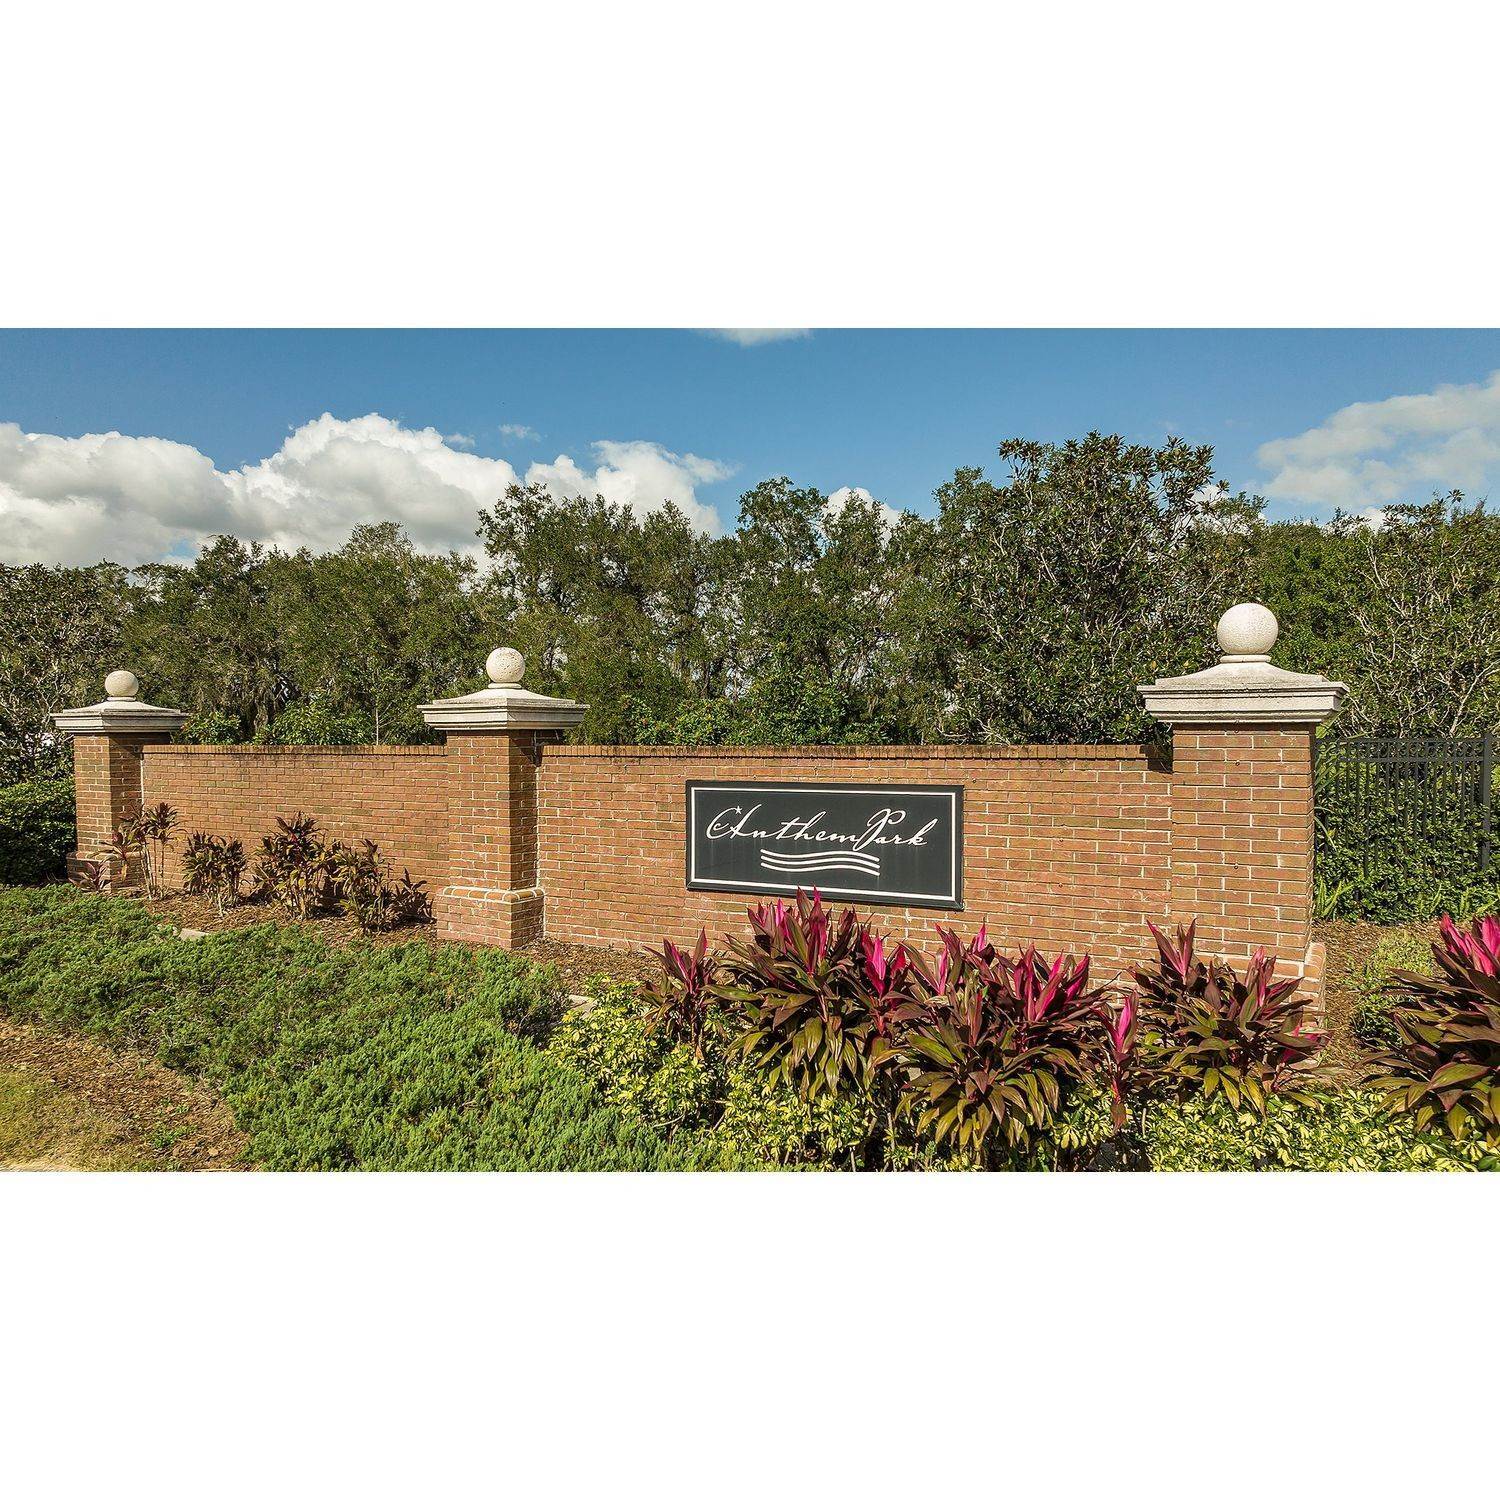 4590 Calvary Way, St. Cloud, FL 34769에 The Townhomes at Anthem Park 건물